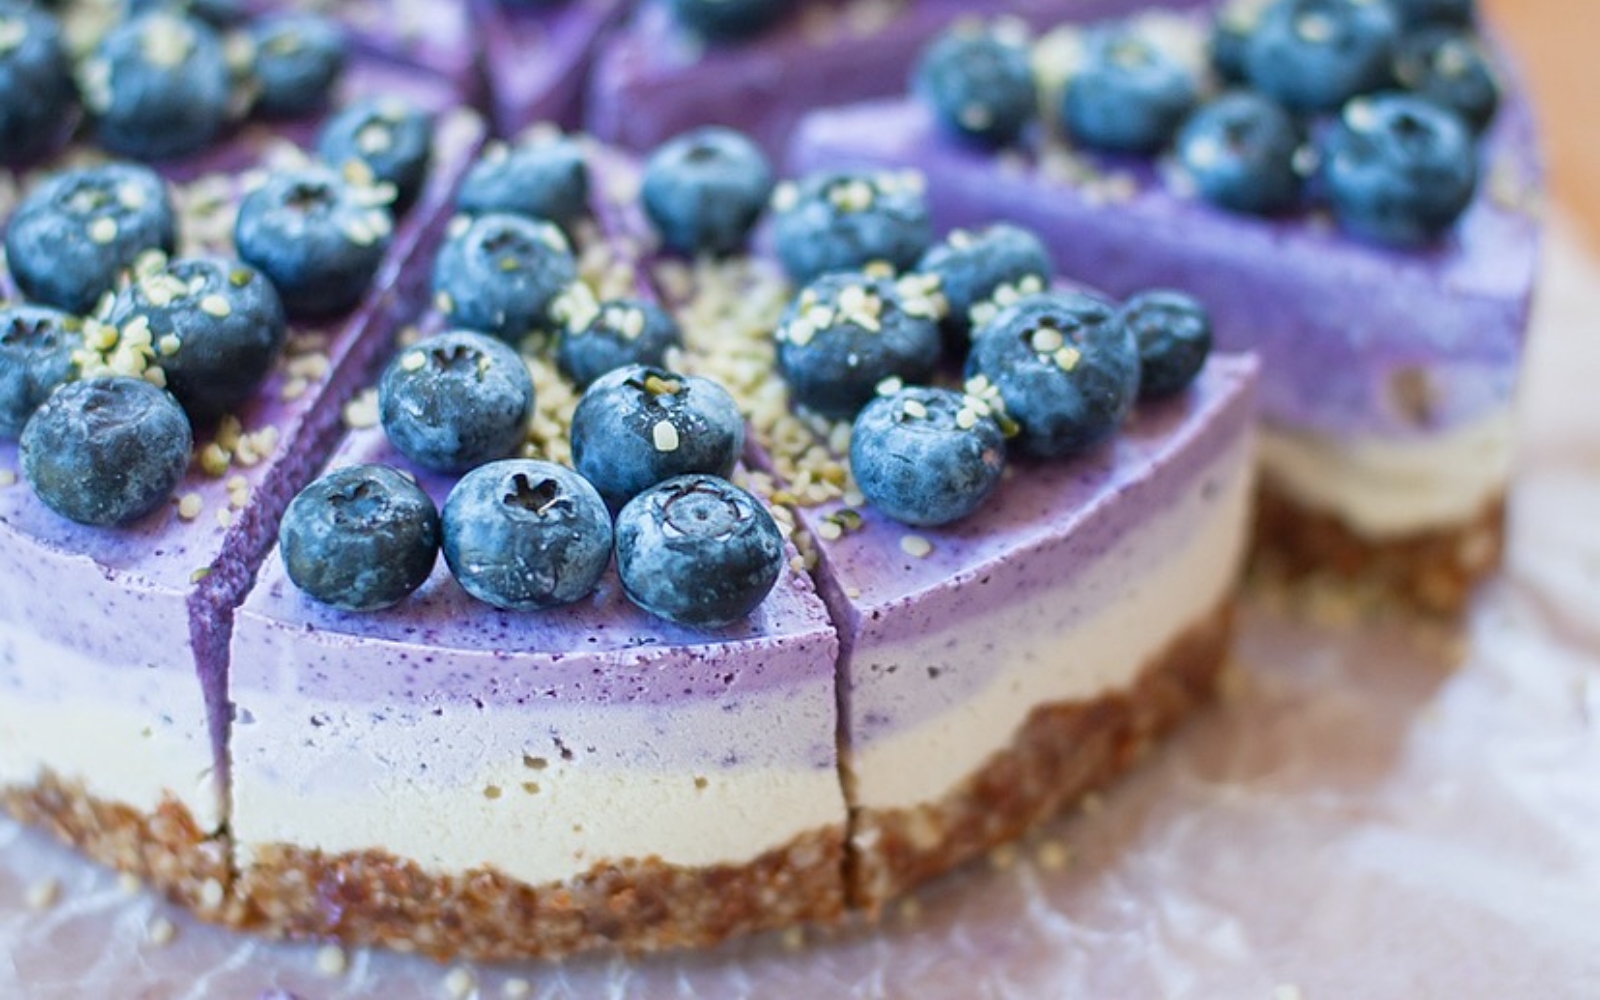 🥗 Wanna Know What People Love About You? Eat Nothing but Vegan Food for 24 Hours to Find Out Vegan blueberry cheesecake